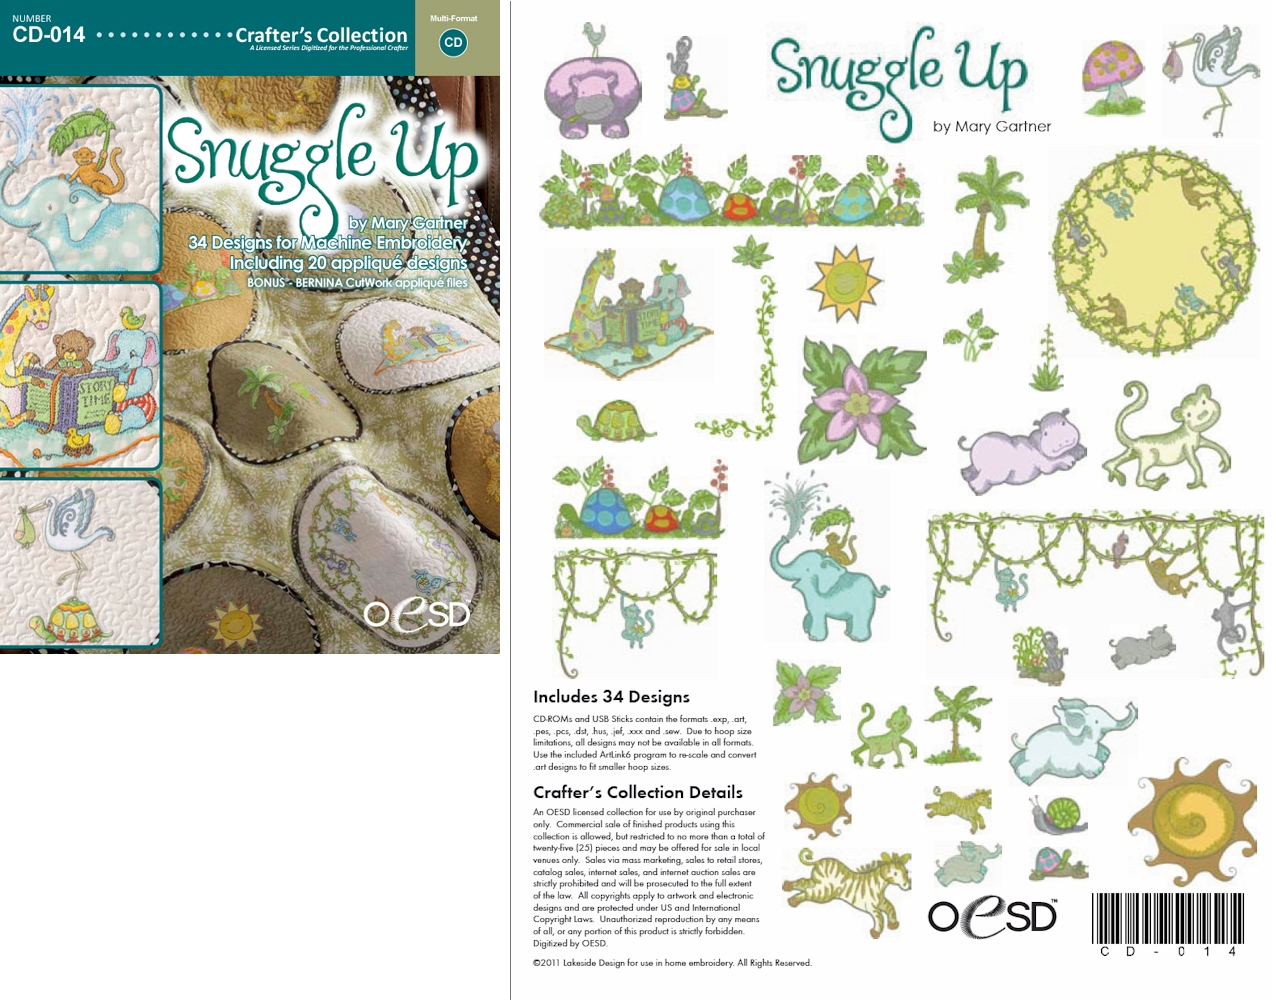 Snuggle Up by Mary Gartner Embroidery Designs on a Multi-Format CD-ROM CD-014